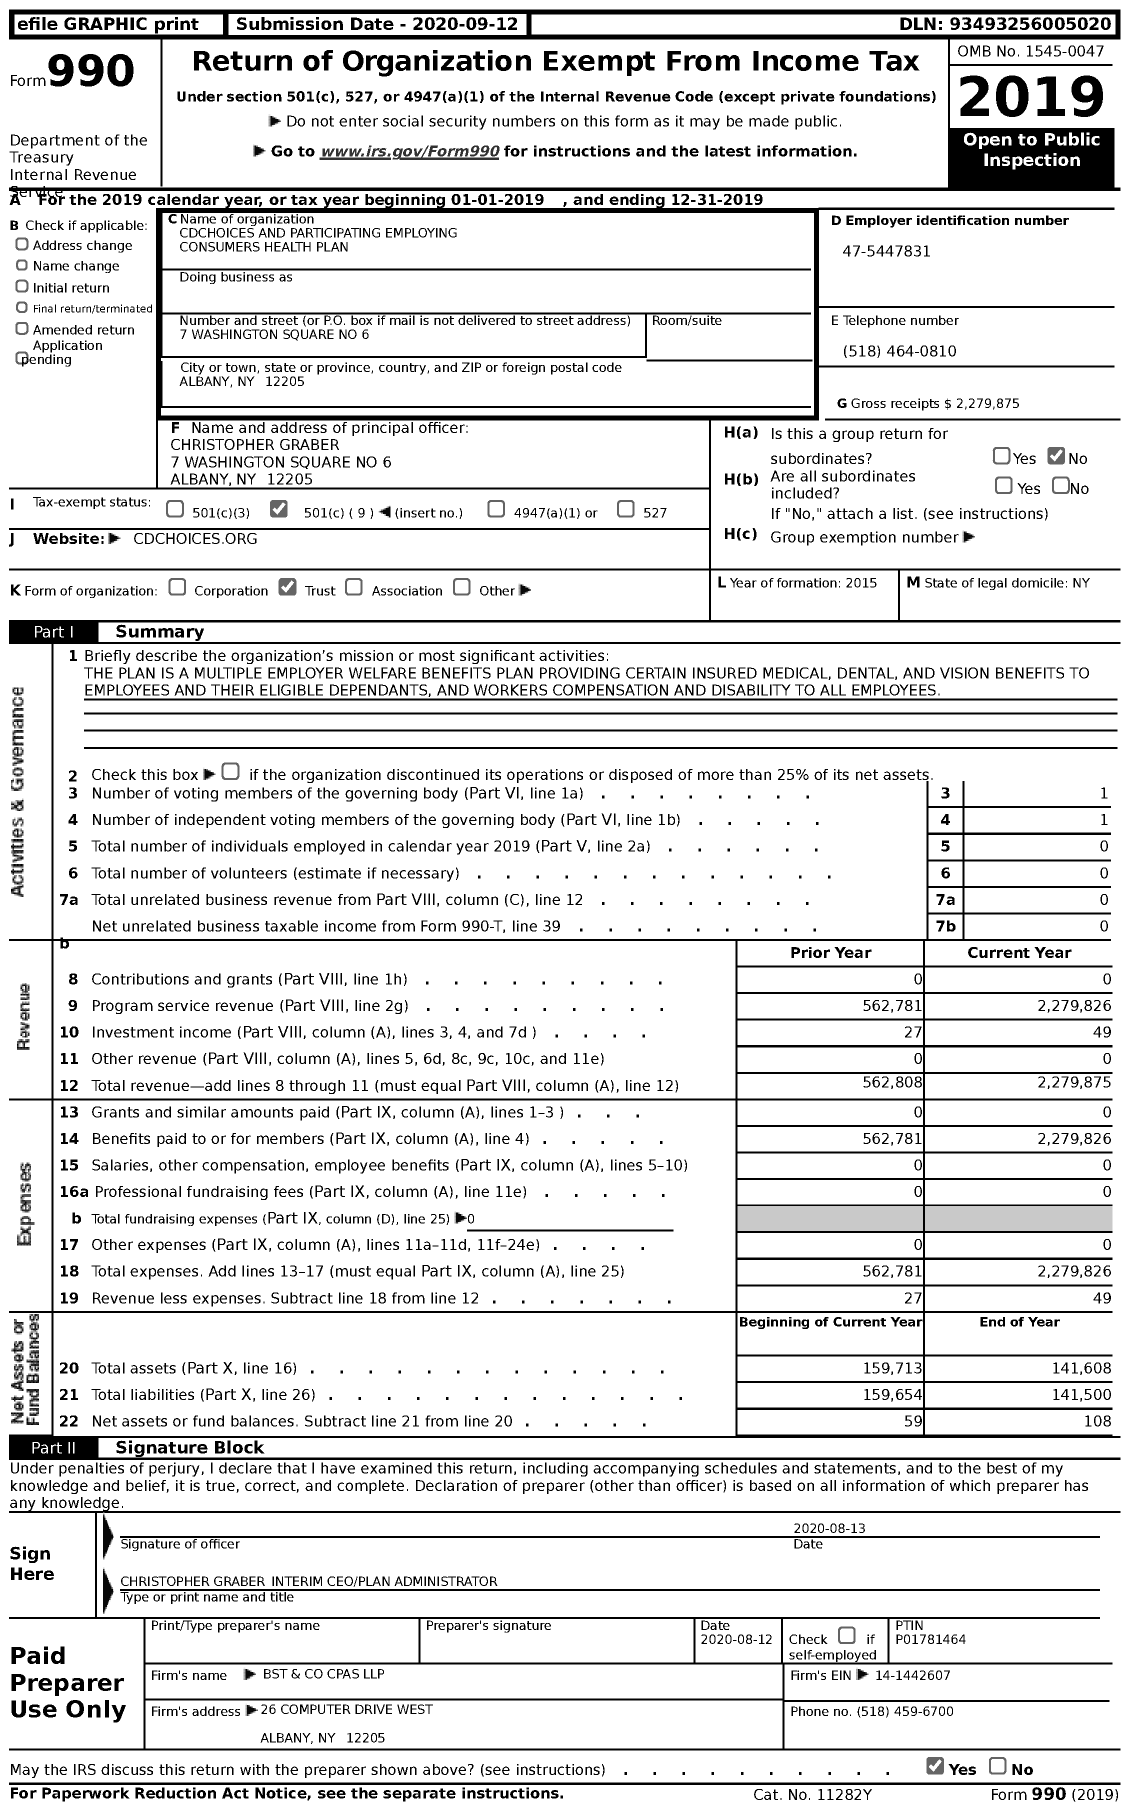 Image of first page of 2019 Form 990 for Cdchoices and Participating Employing Consumers Health Plan